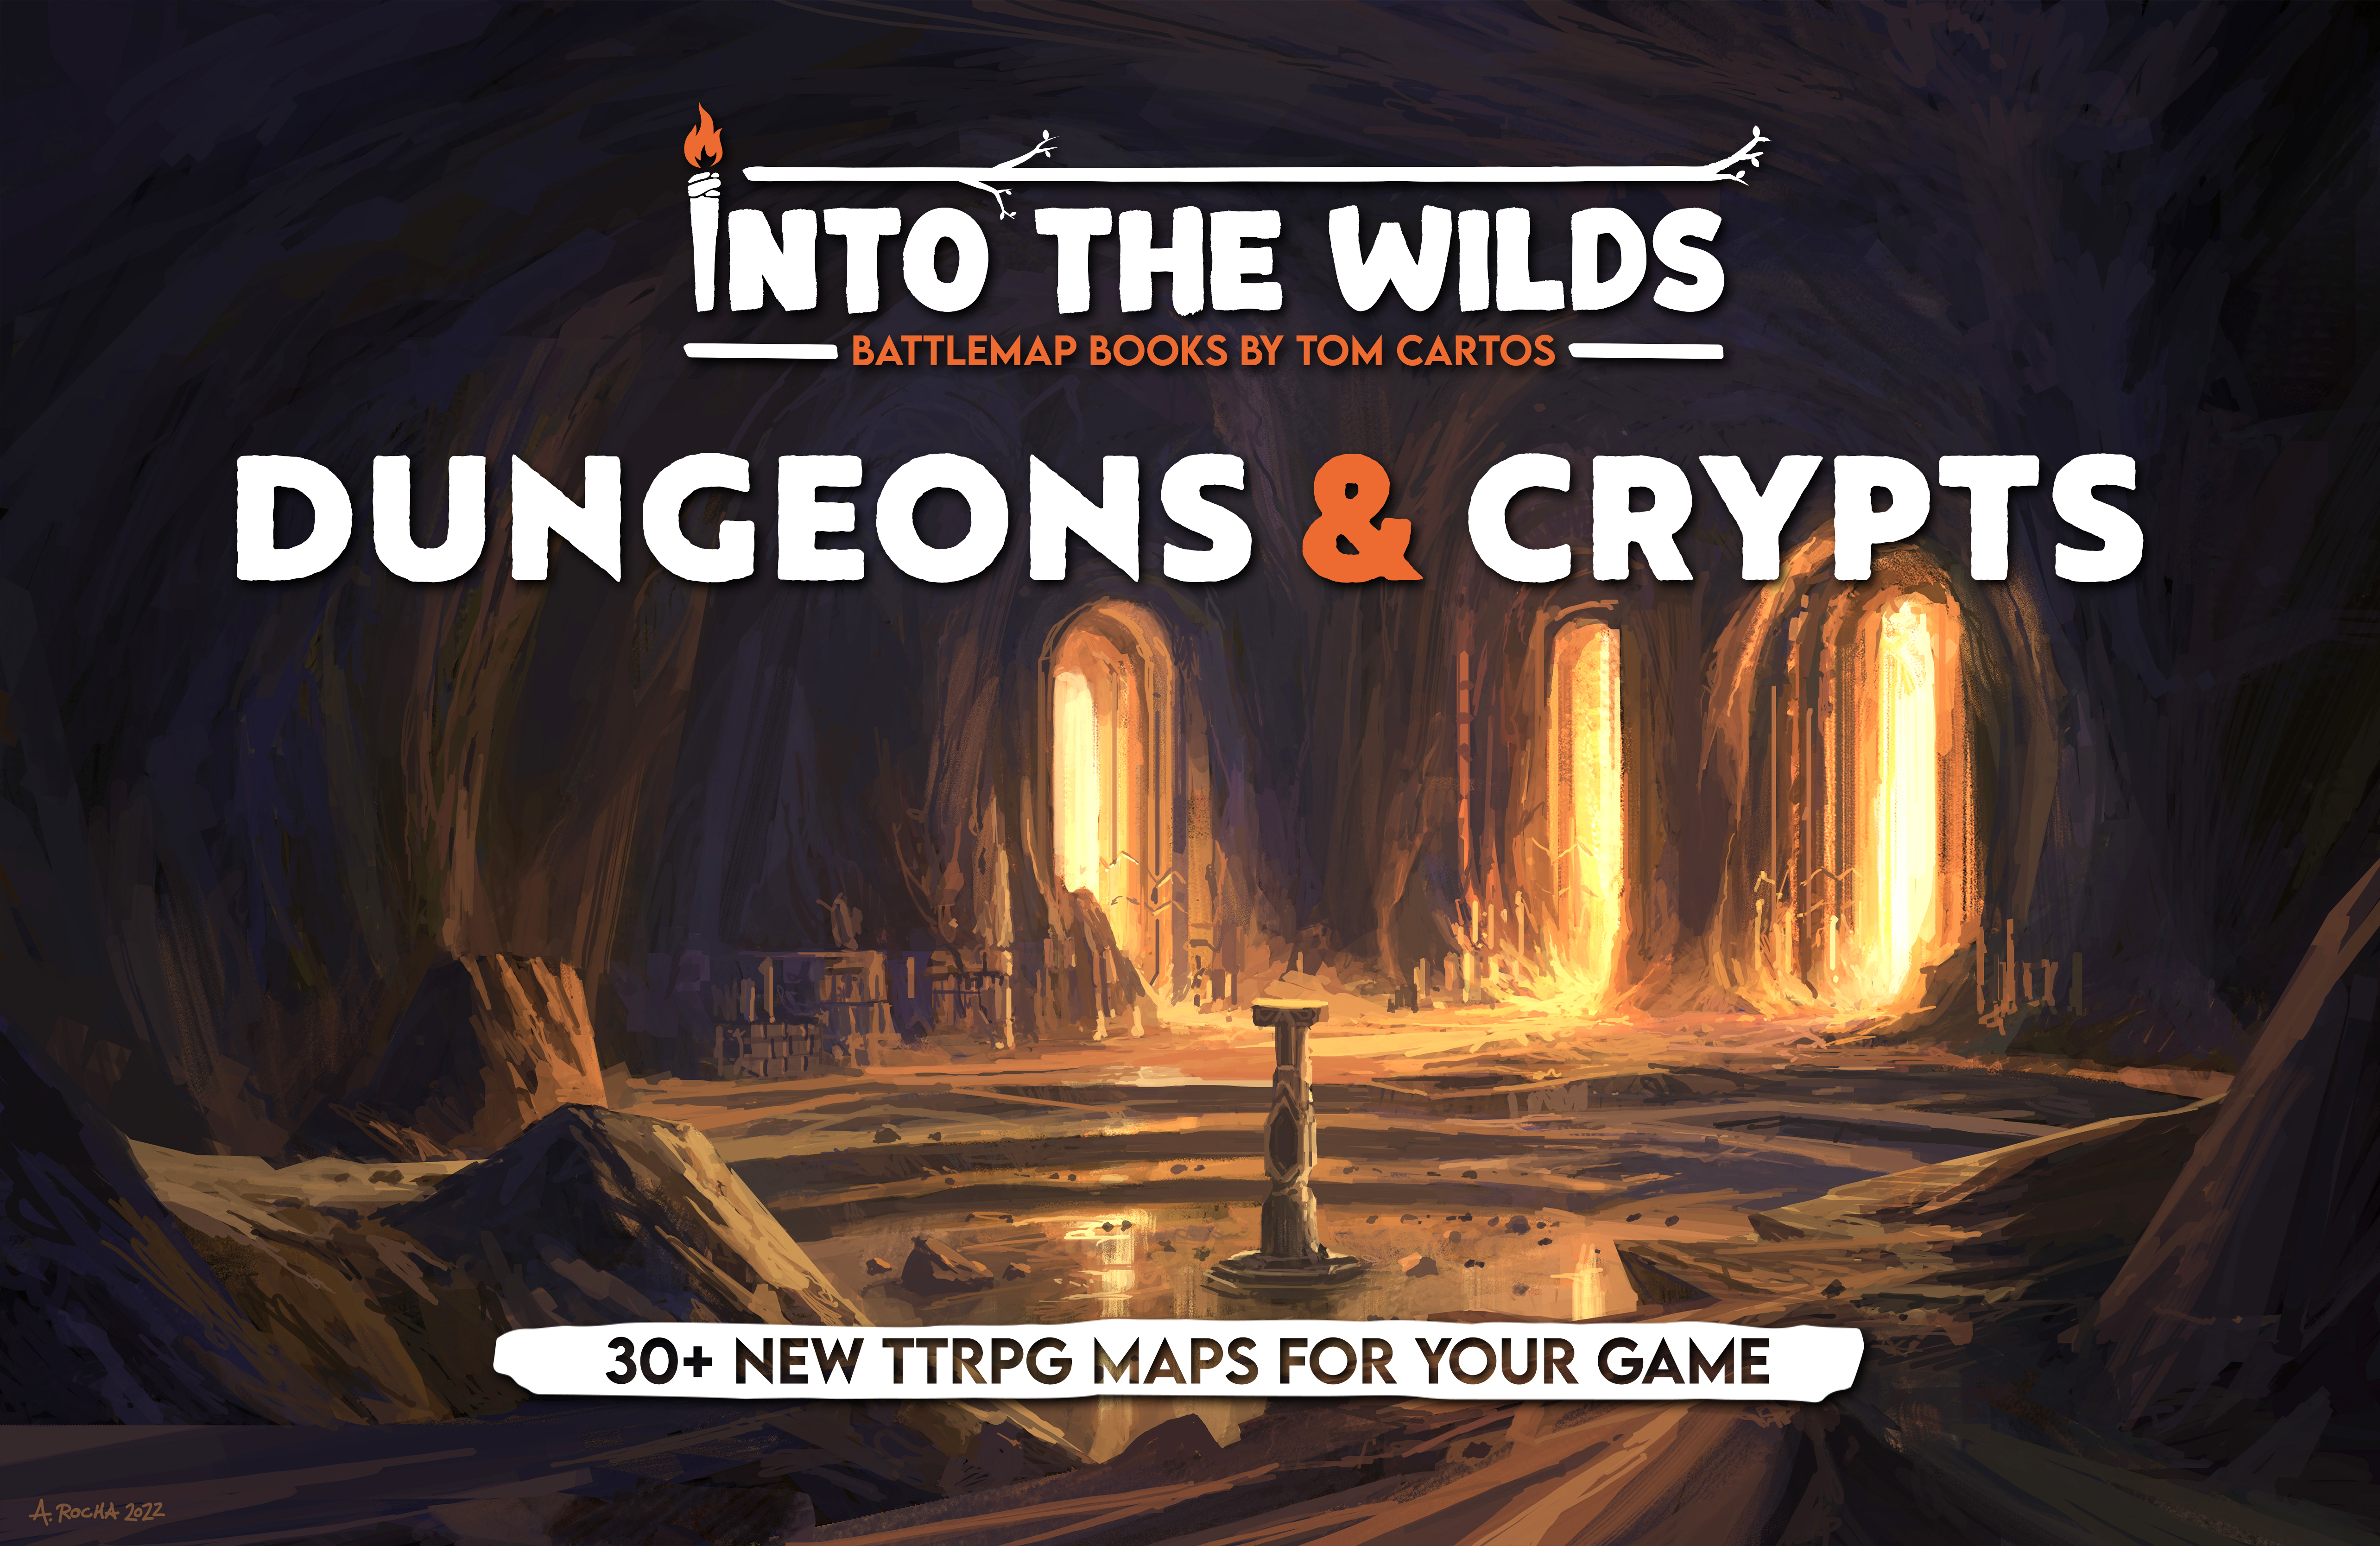 Into the Wilds Battlemap Books: Dungeons and Crypts 